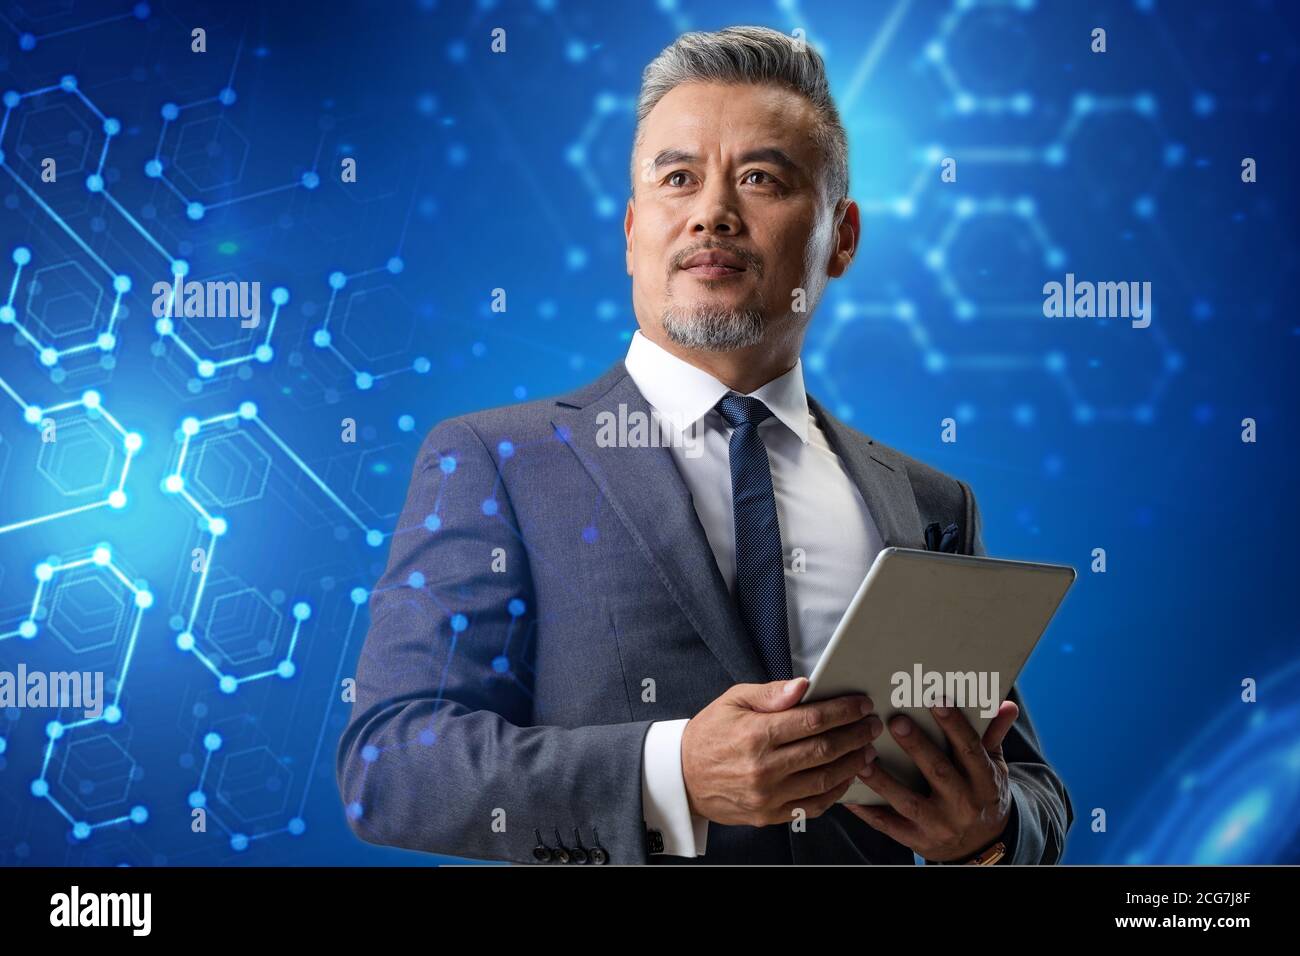 Holding a tablet business man Stock Photo